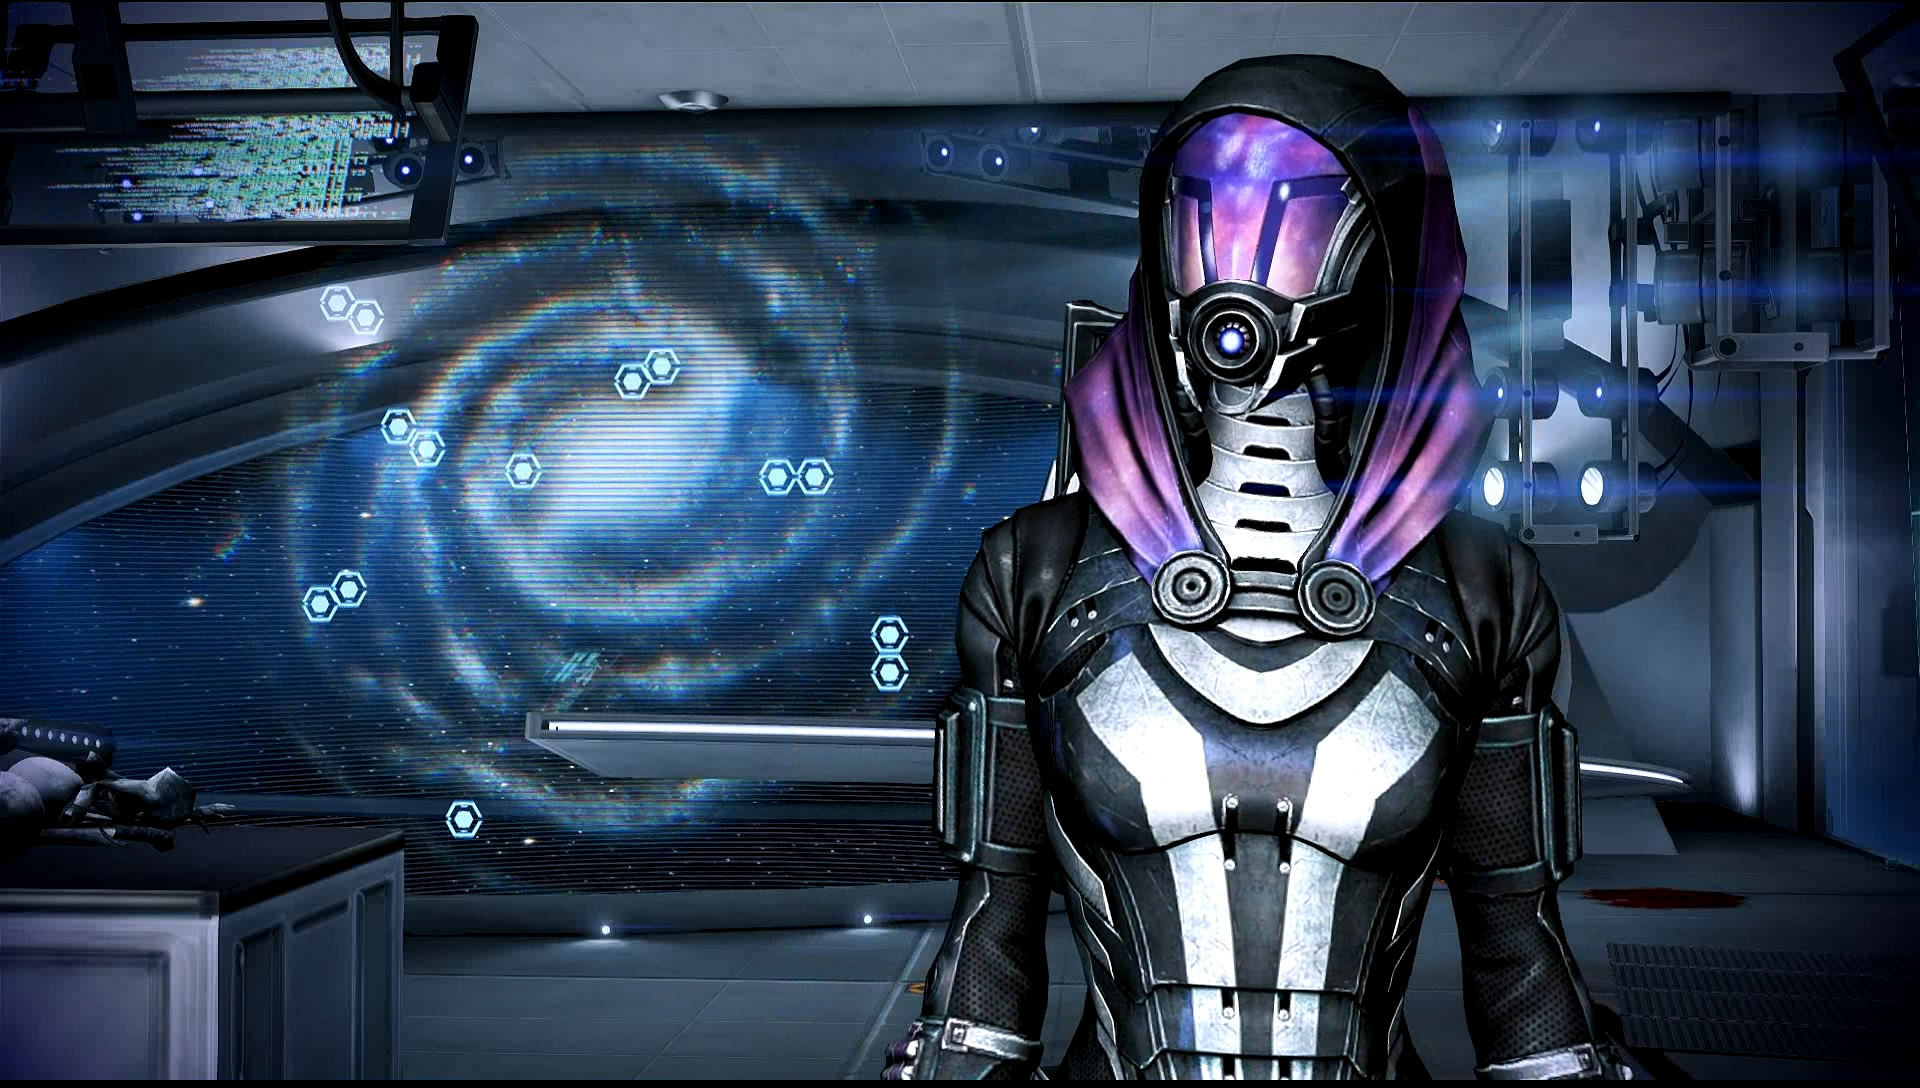 Mass Effect Tali In Dr Brysons Office Dreamscene By Droot1986 On